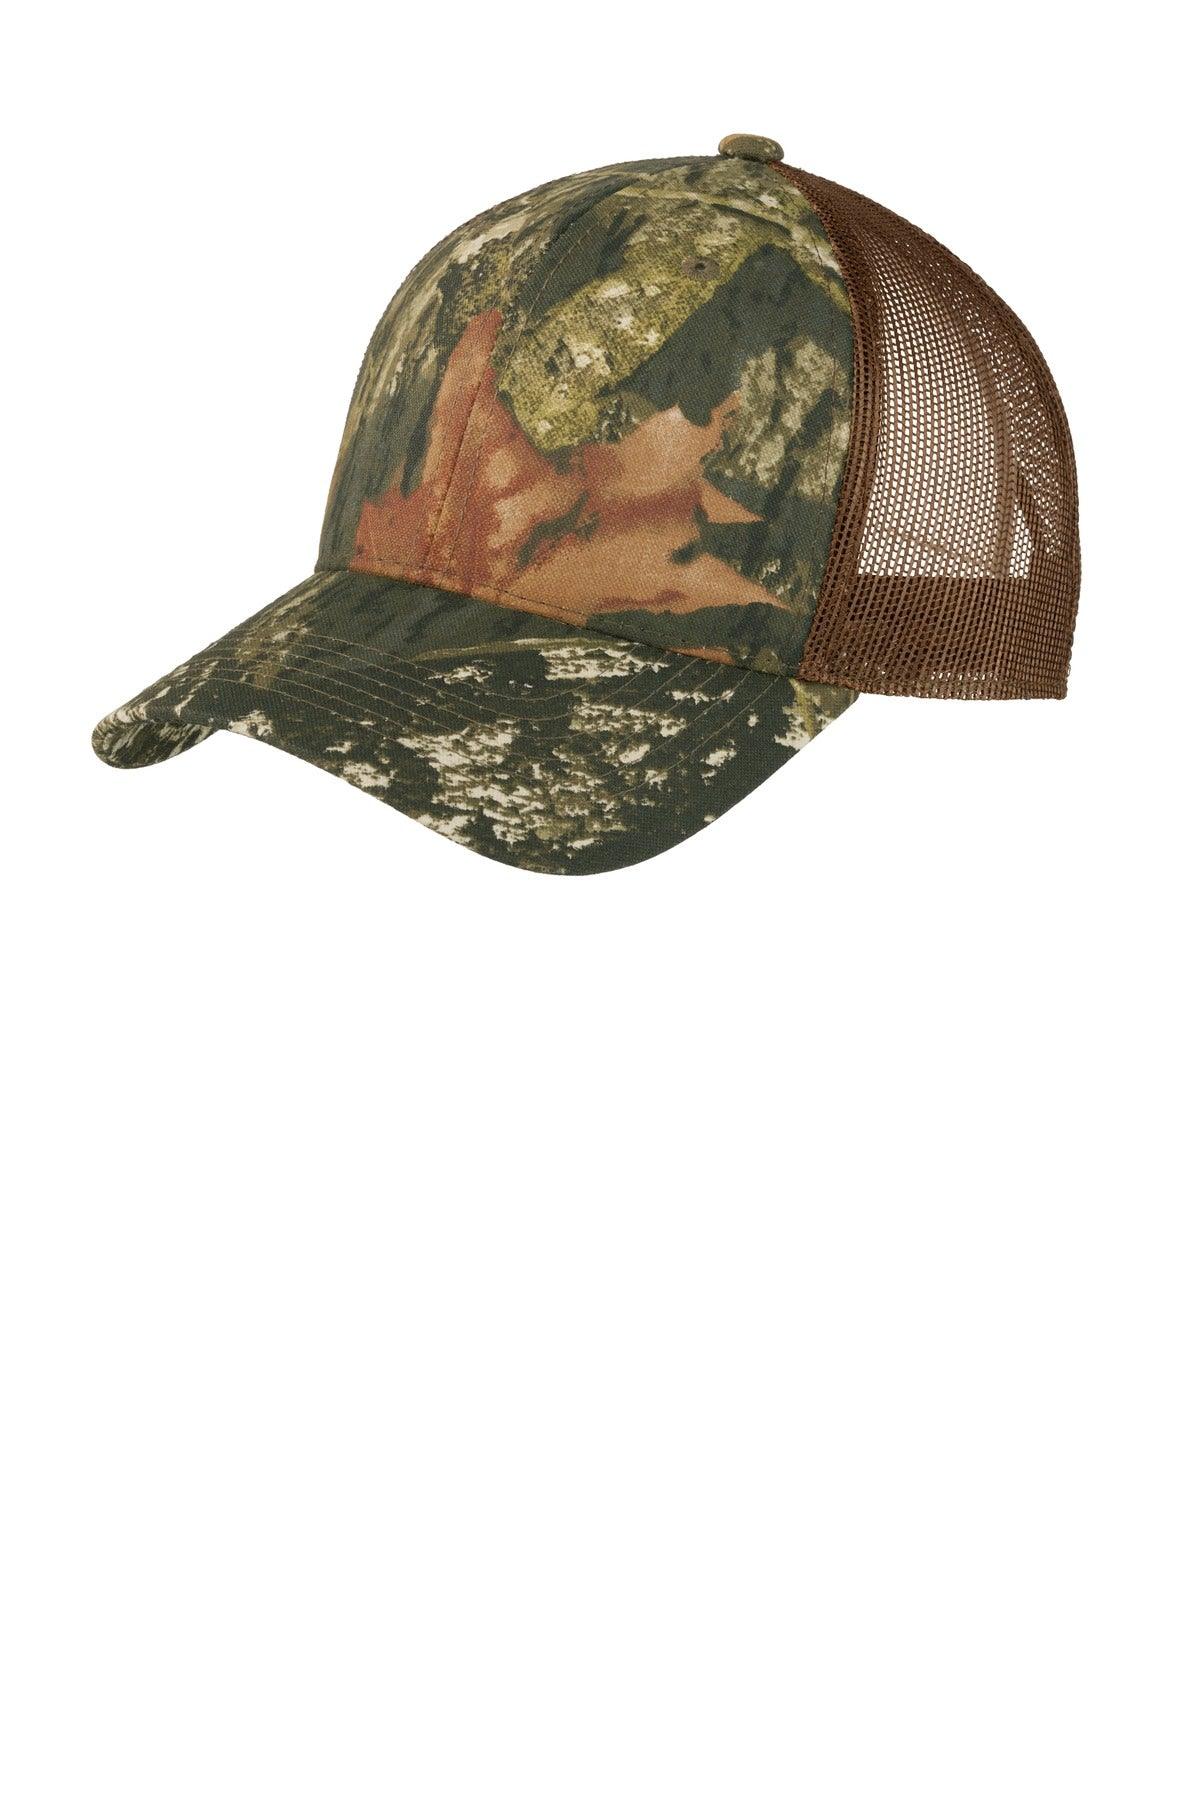 Port Authority Structured Camouflage Mesh Back Cap. C930 - Dresses Max